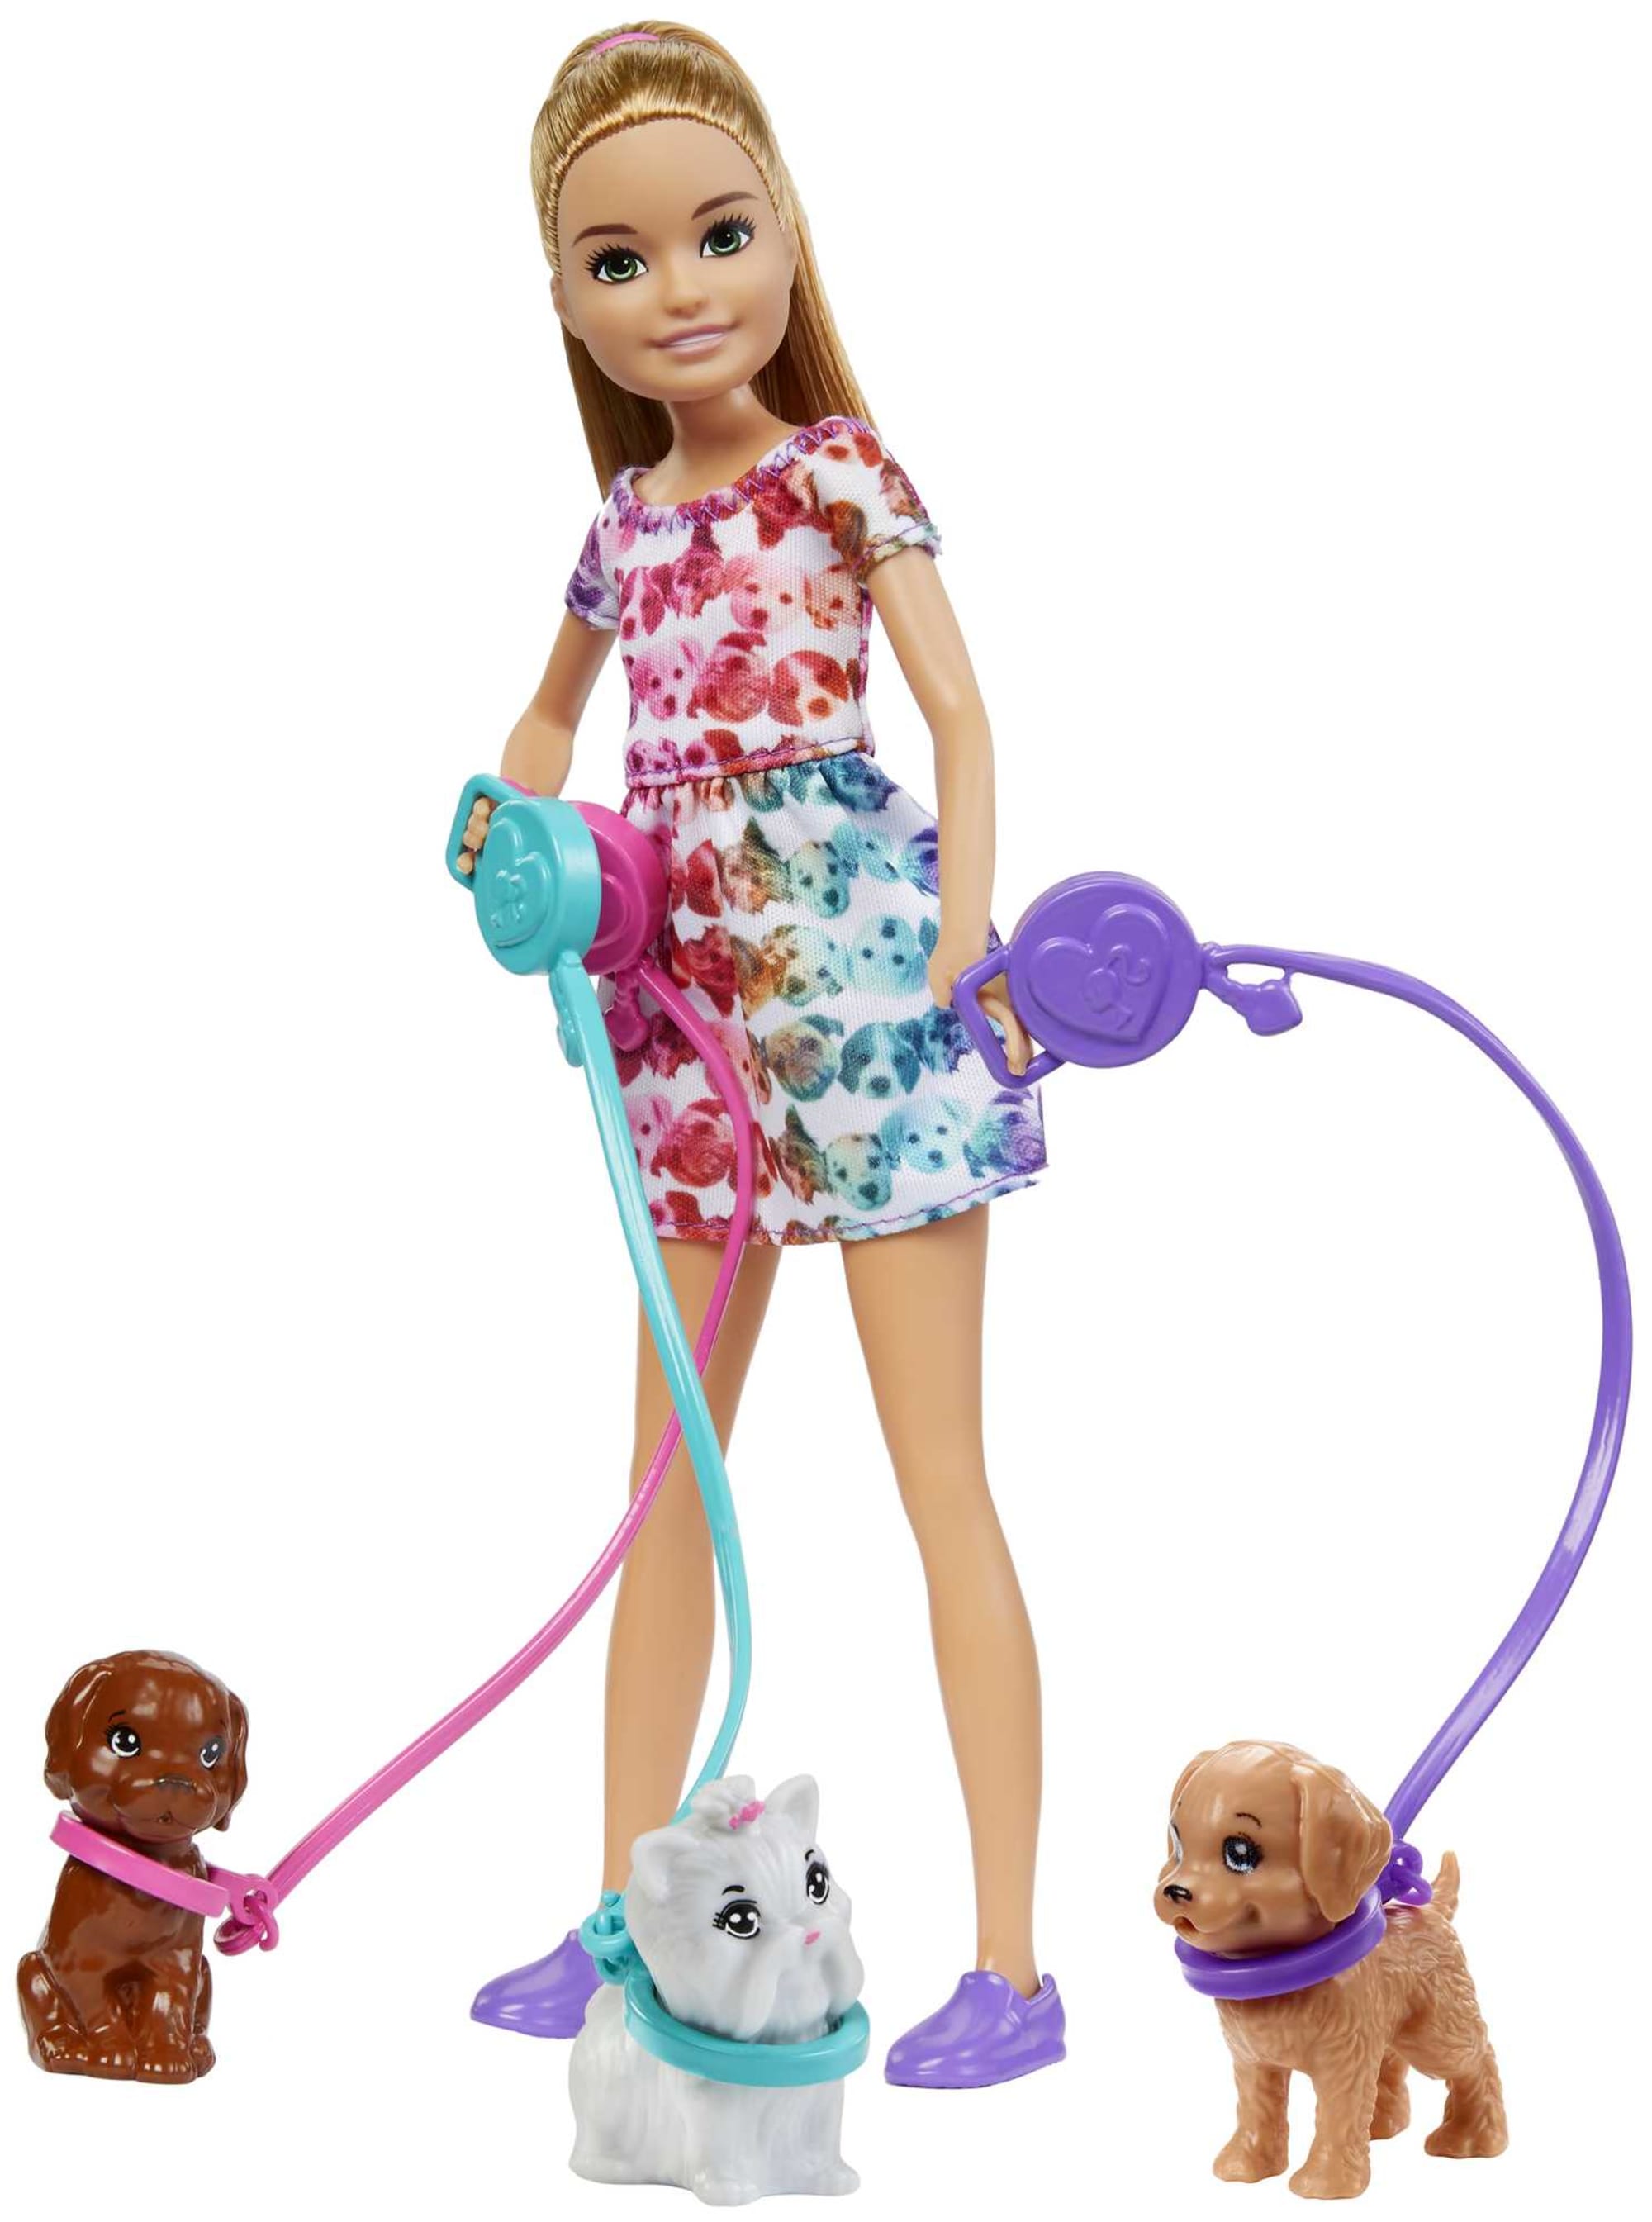 Barbie Team Stacie Doll and Accessories GFF48 |